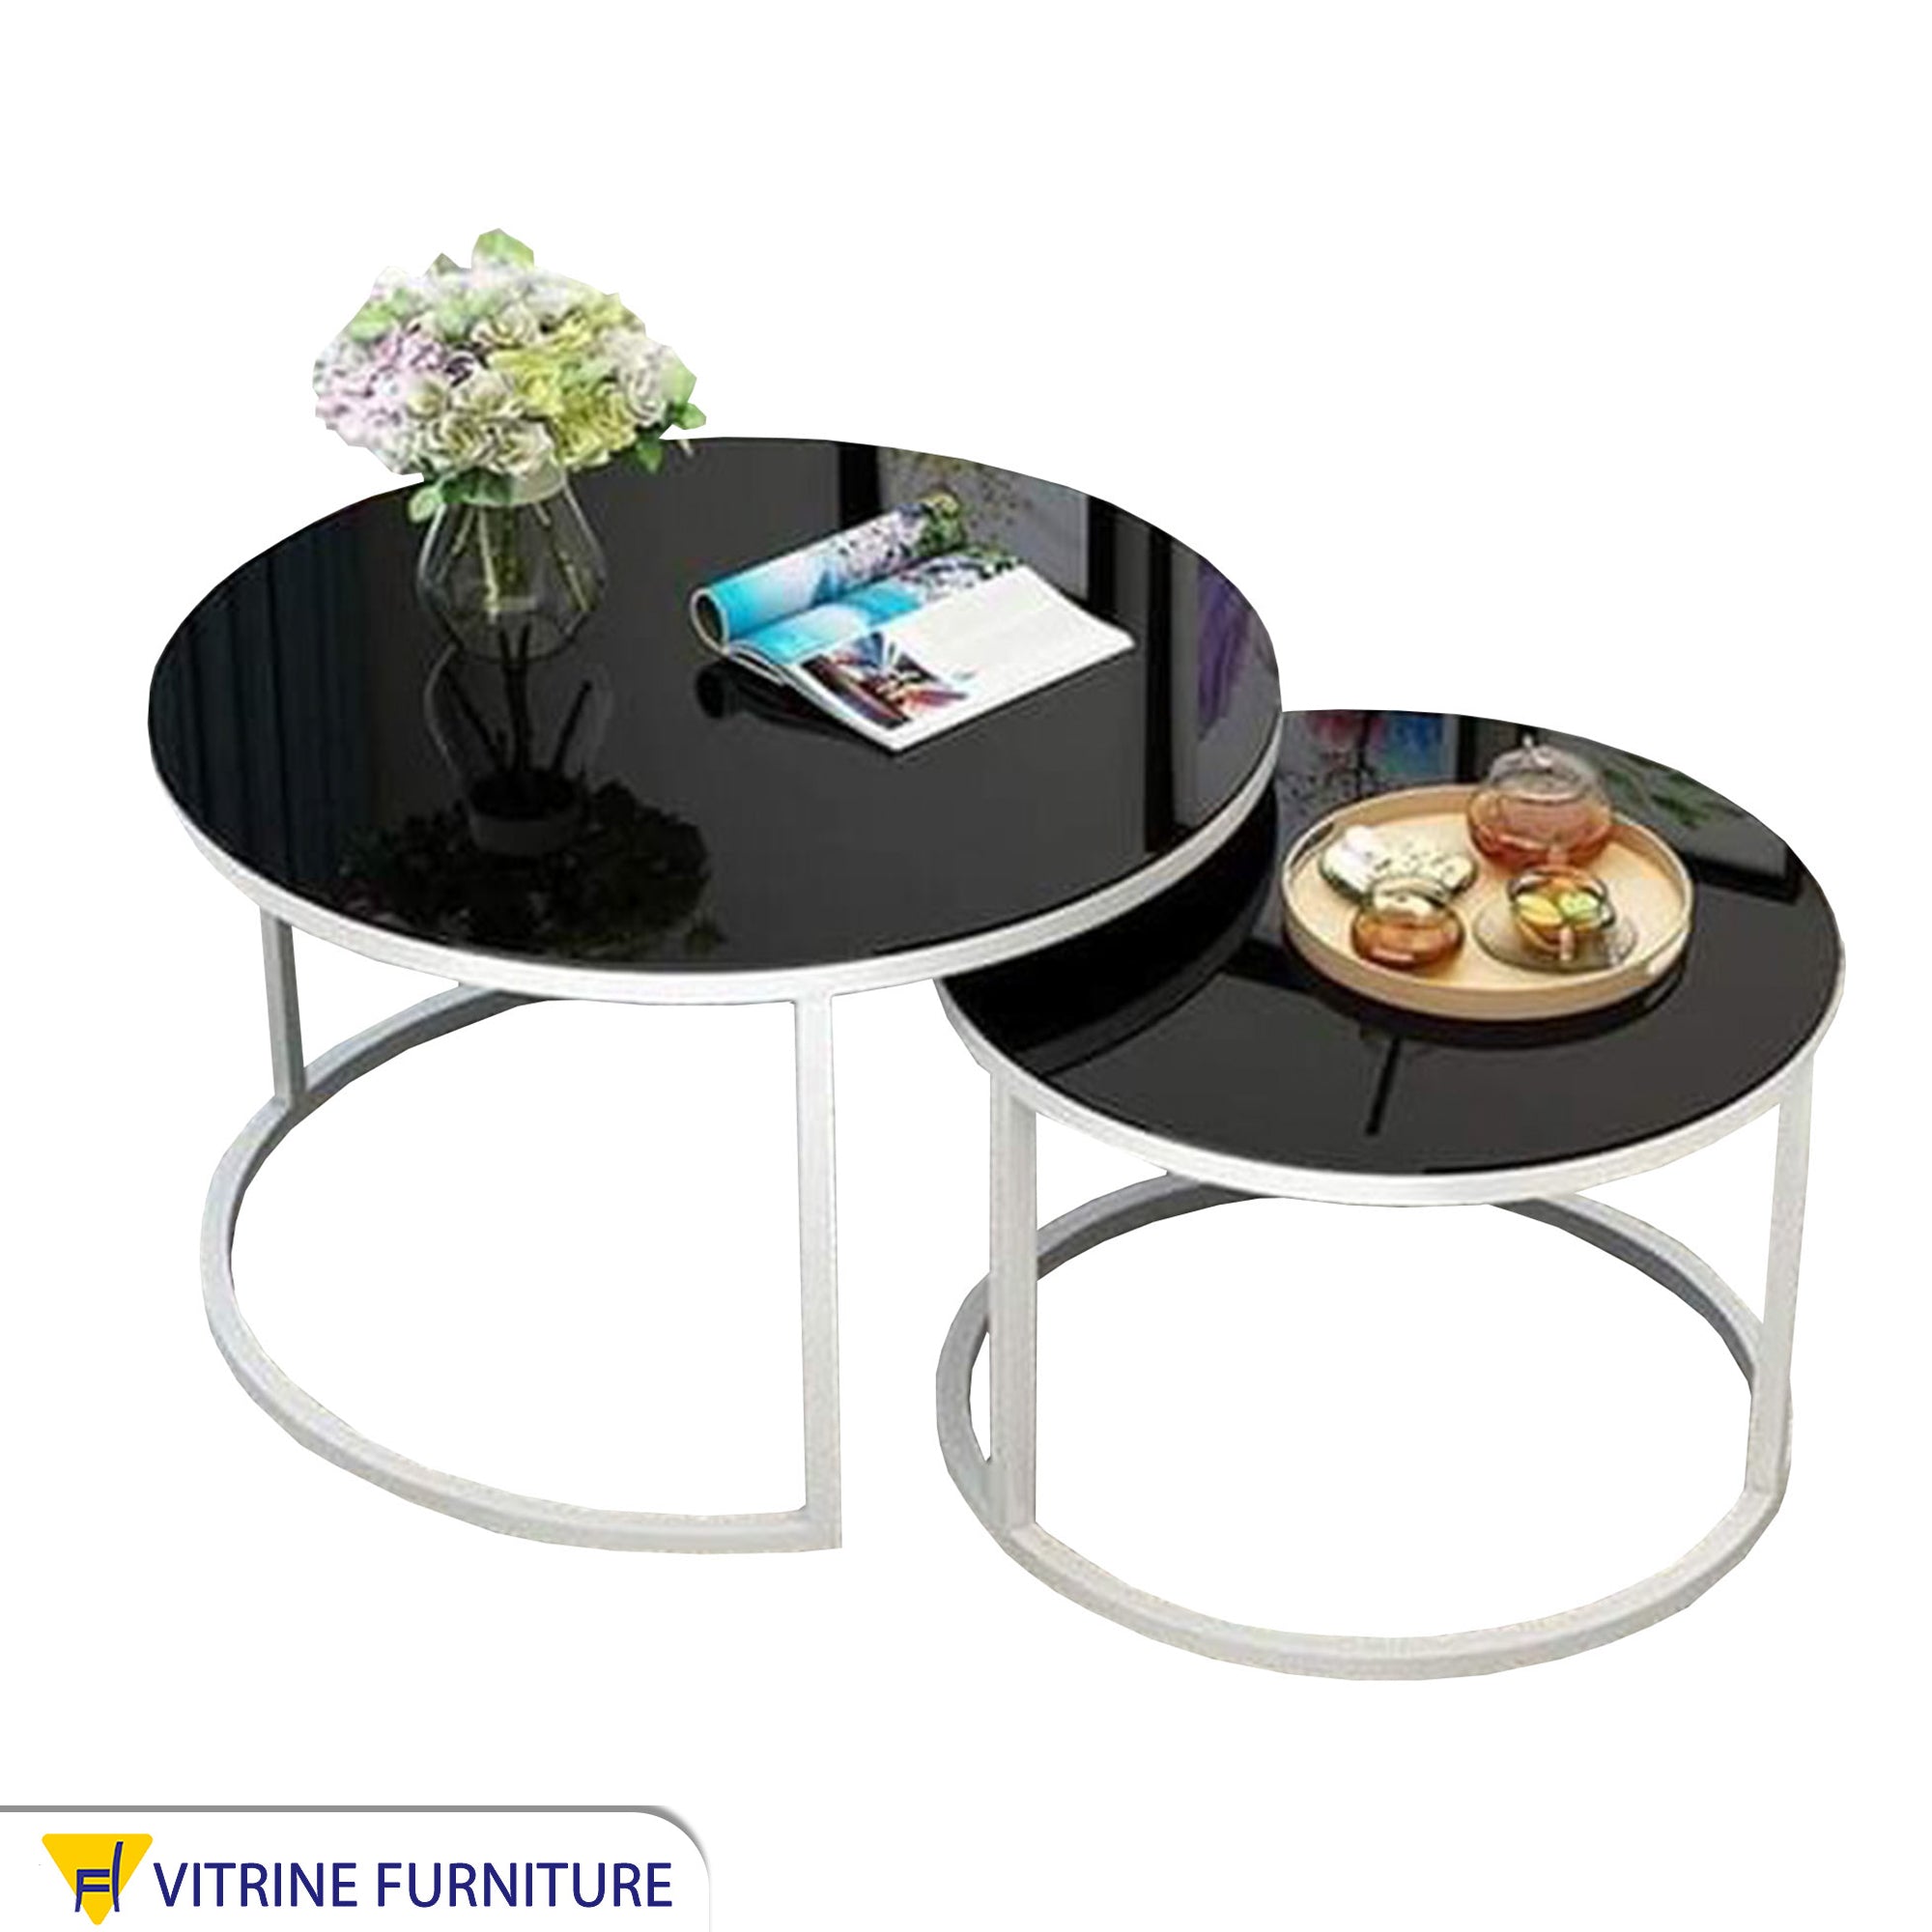 Two circular tables in black and white